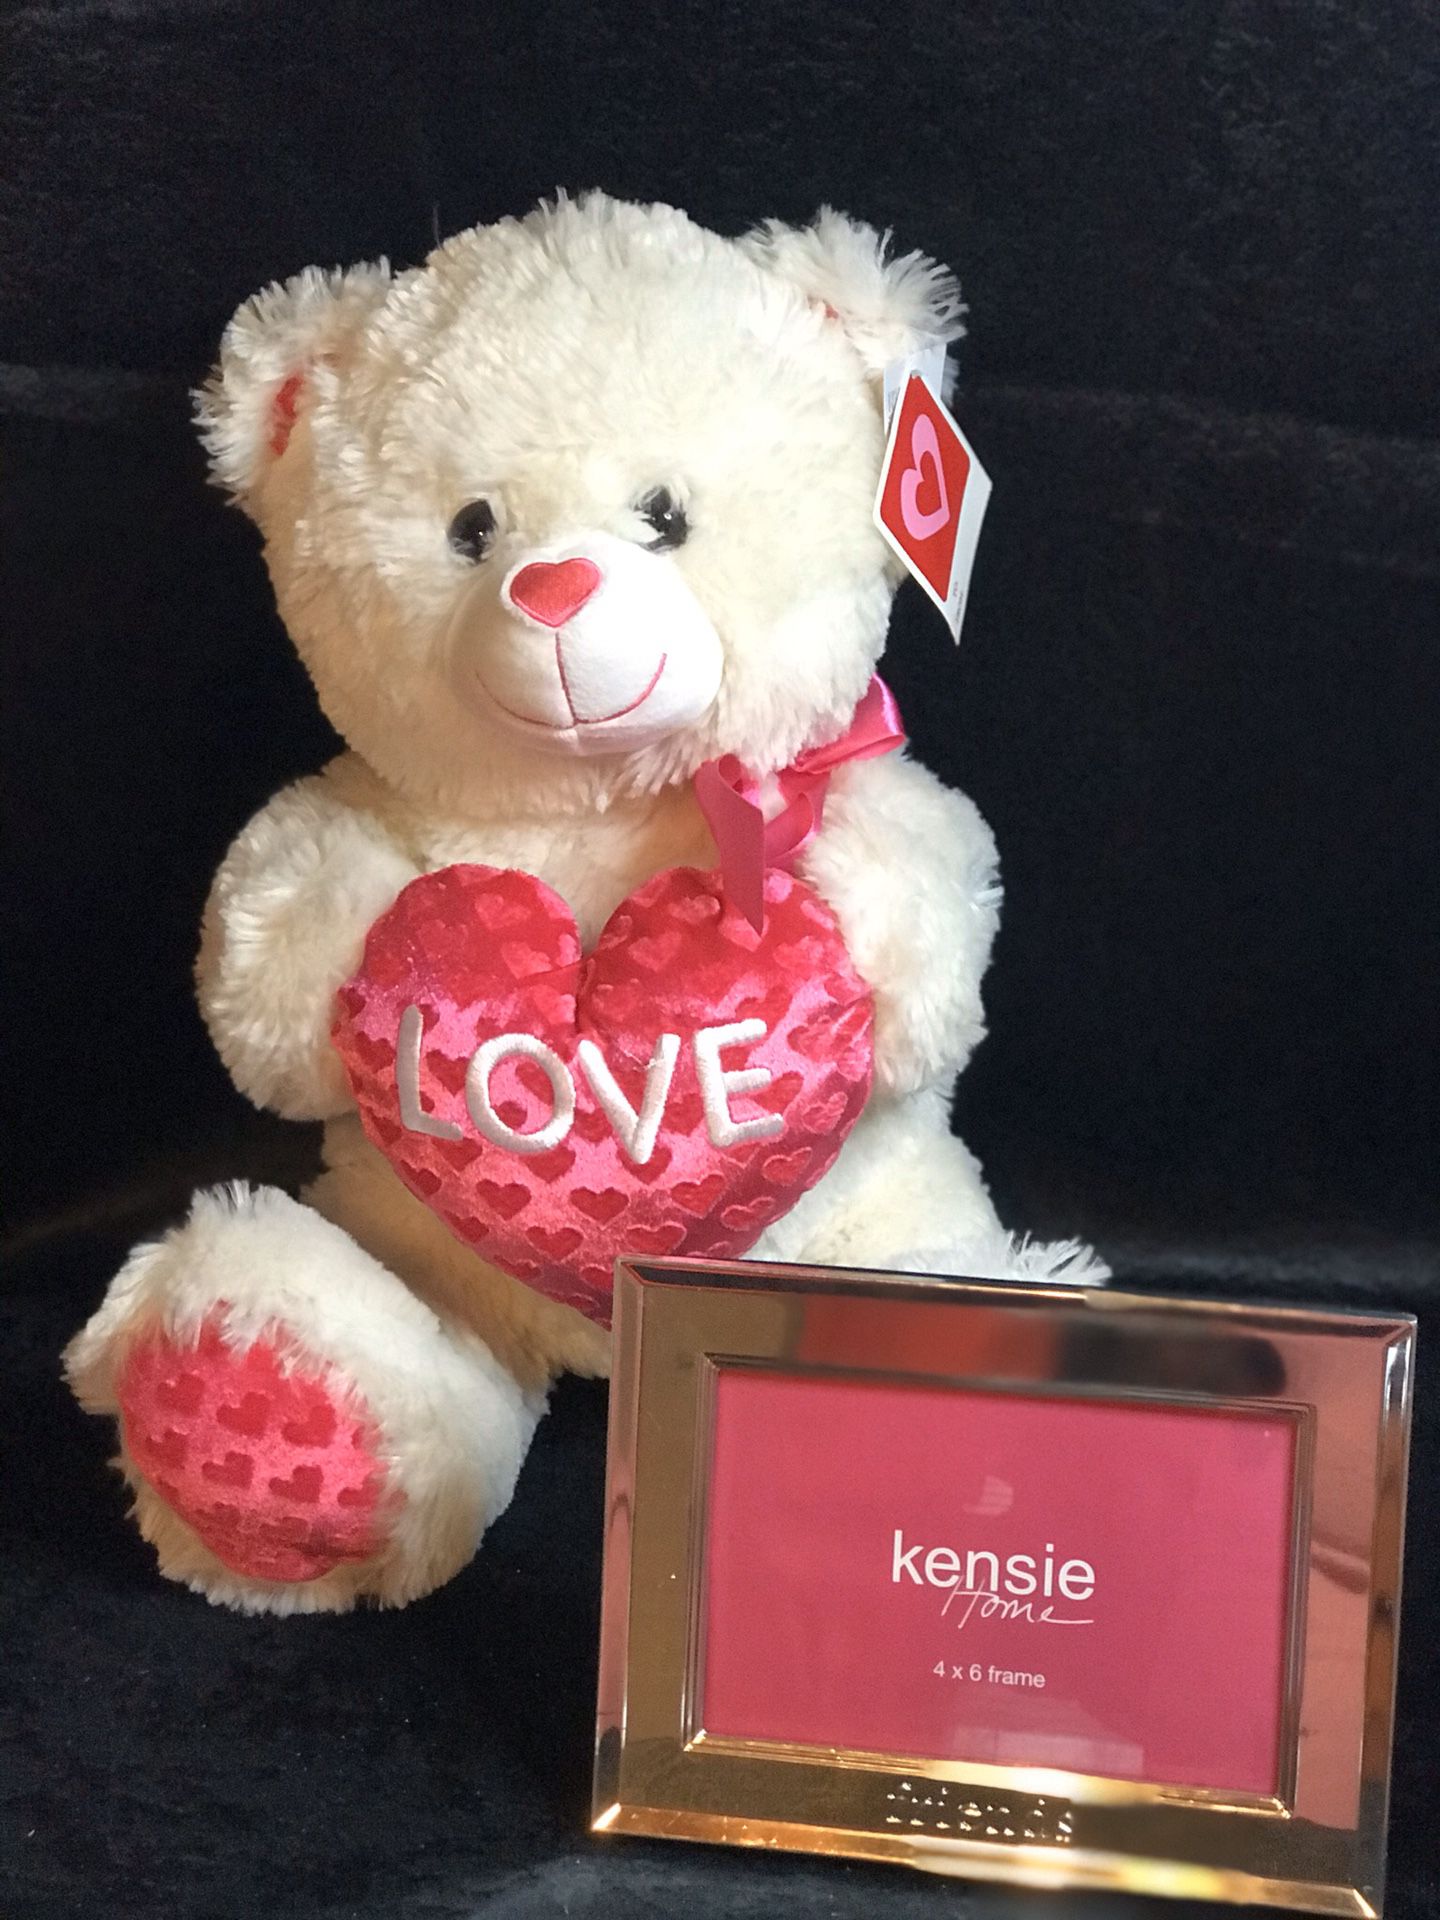 Love Hearts Plush bear pink white & Gift With purchase Kensie photo frame!